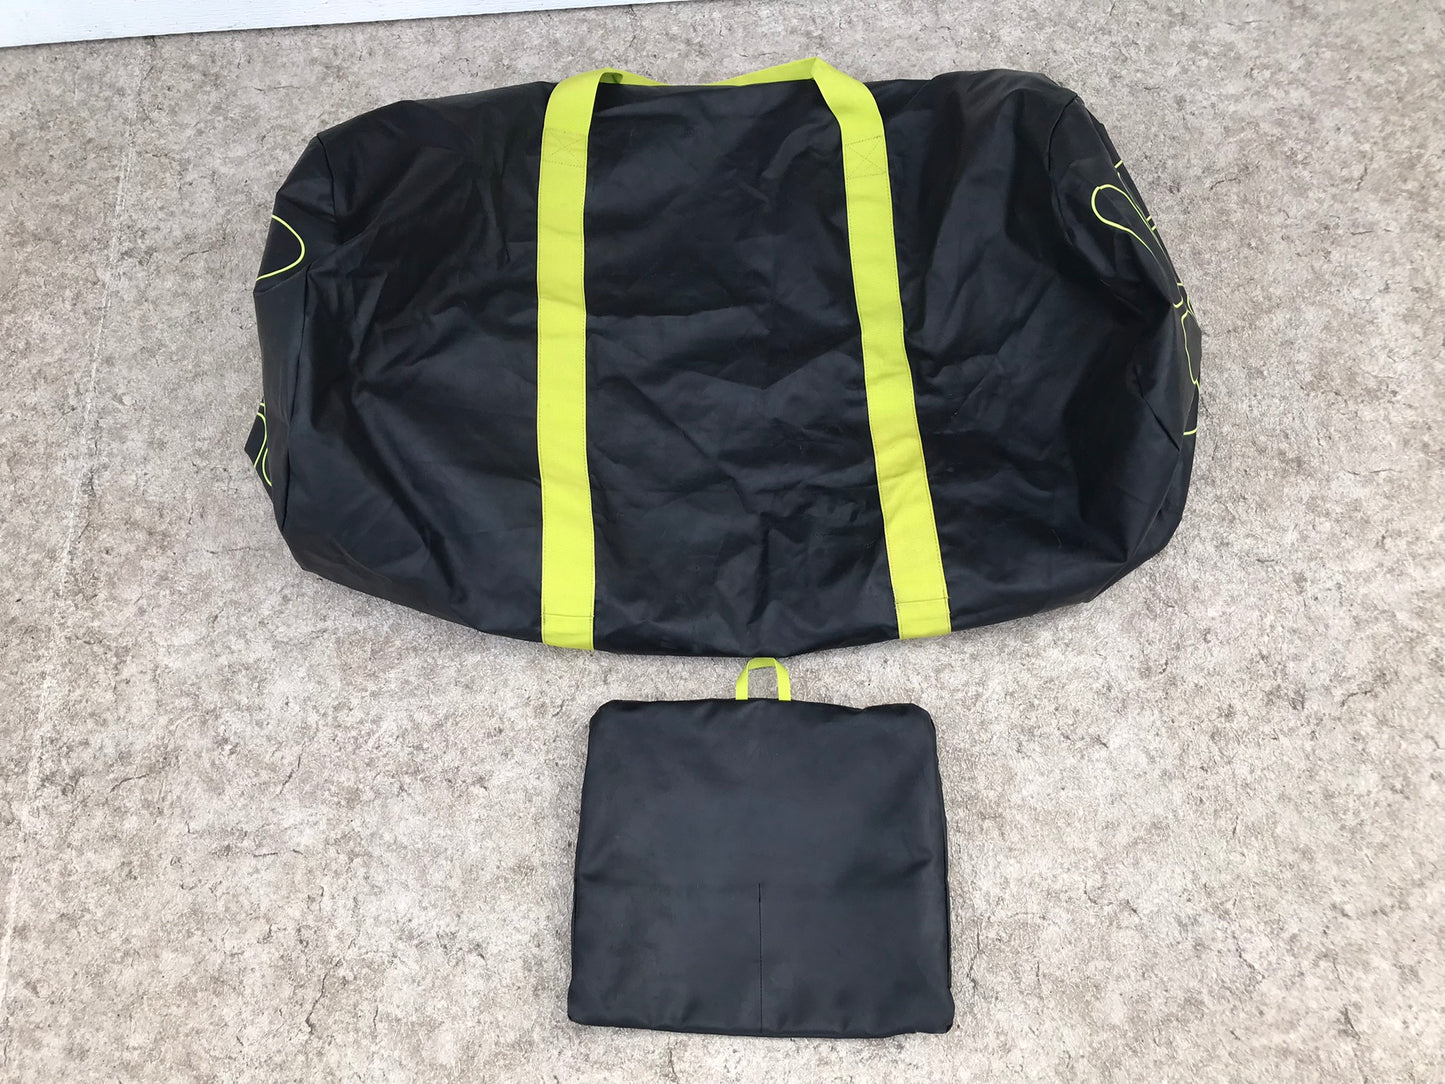 Columbia X Large Dry Sack Waterproof Duffle Camping Sports Gear Bag Excellent As New With Small Gear  Computer Bag All Zippers Perfect